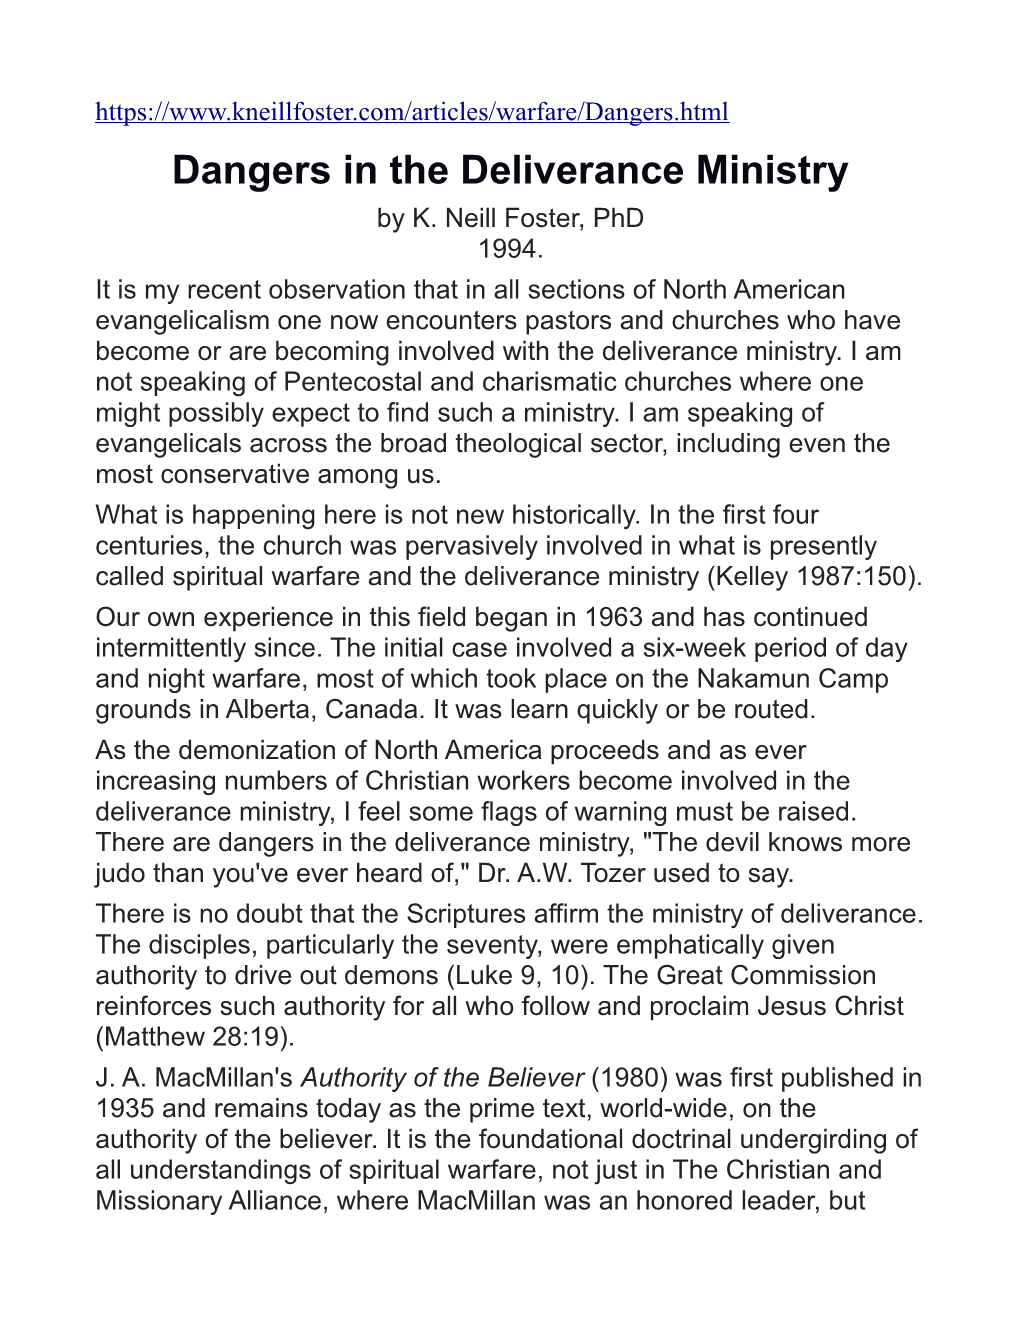 Dangers in the Deliverance Ministry by K